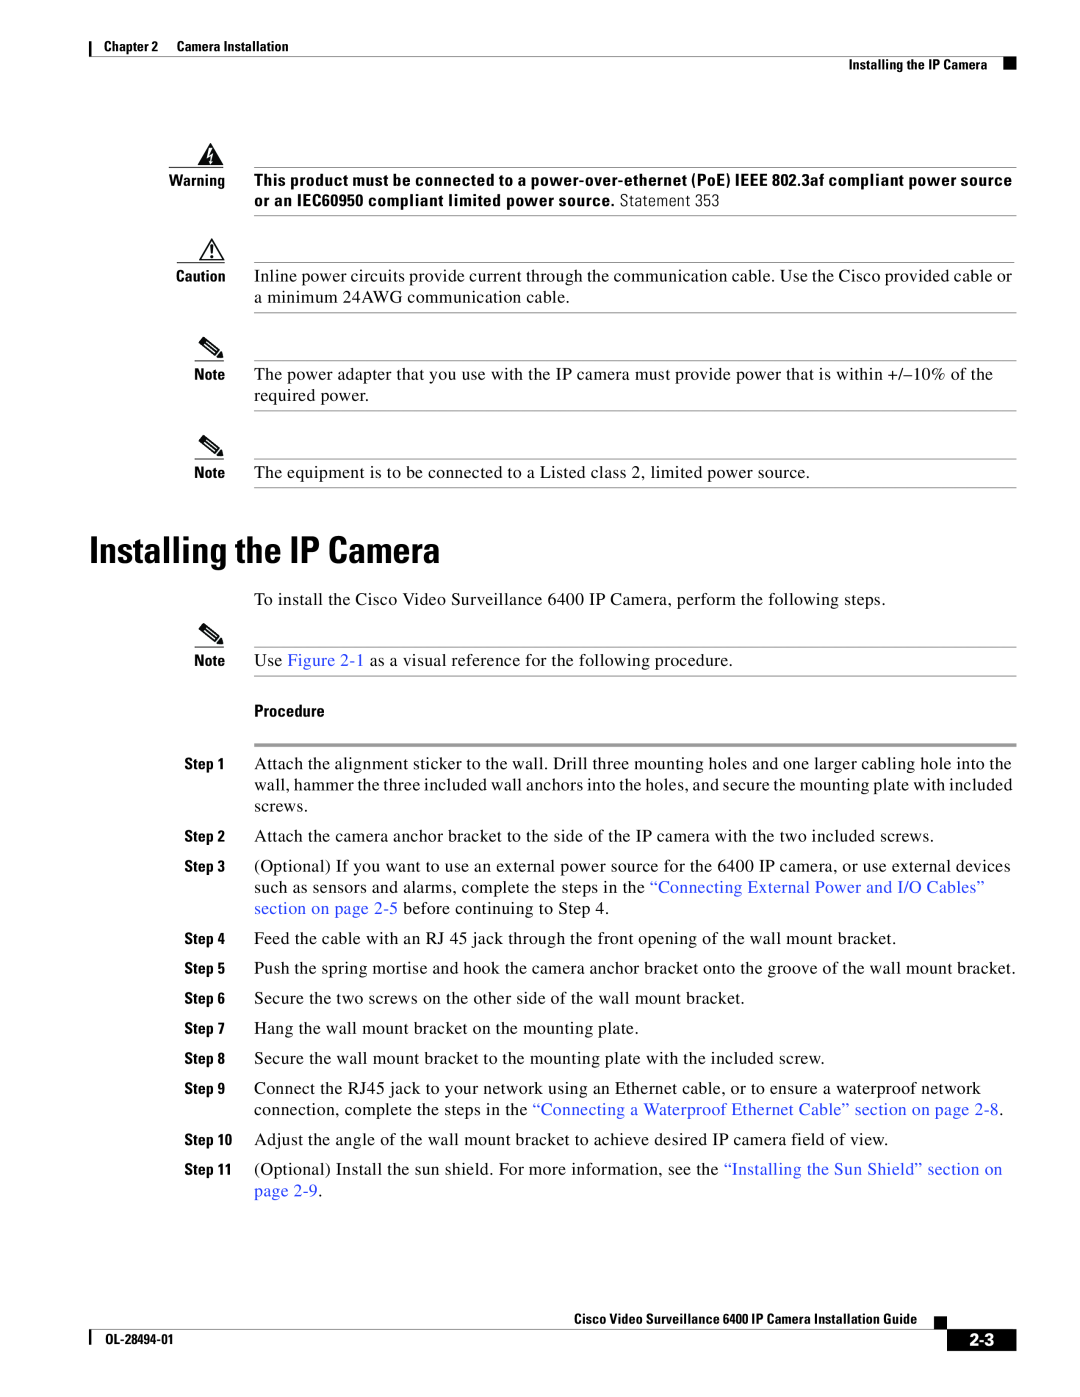 Cisco Systems 6400 manual Installing the IP Camera, Procedure 